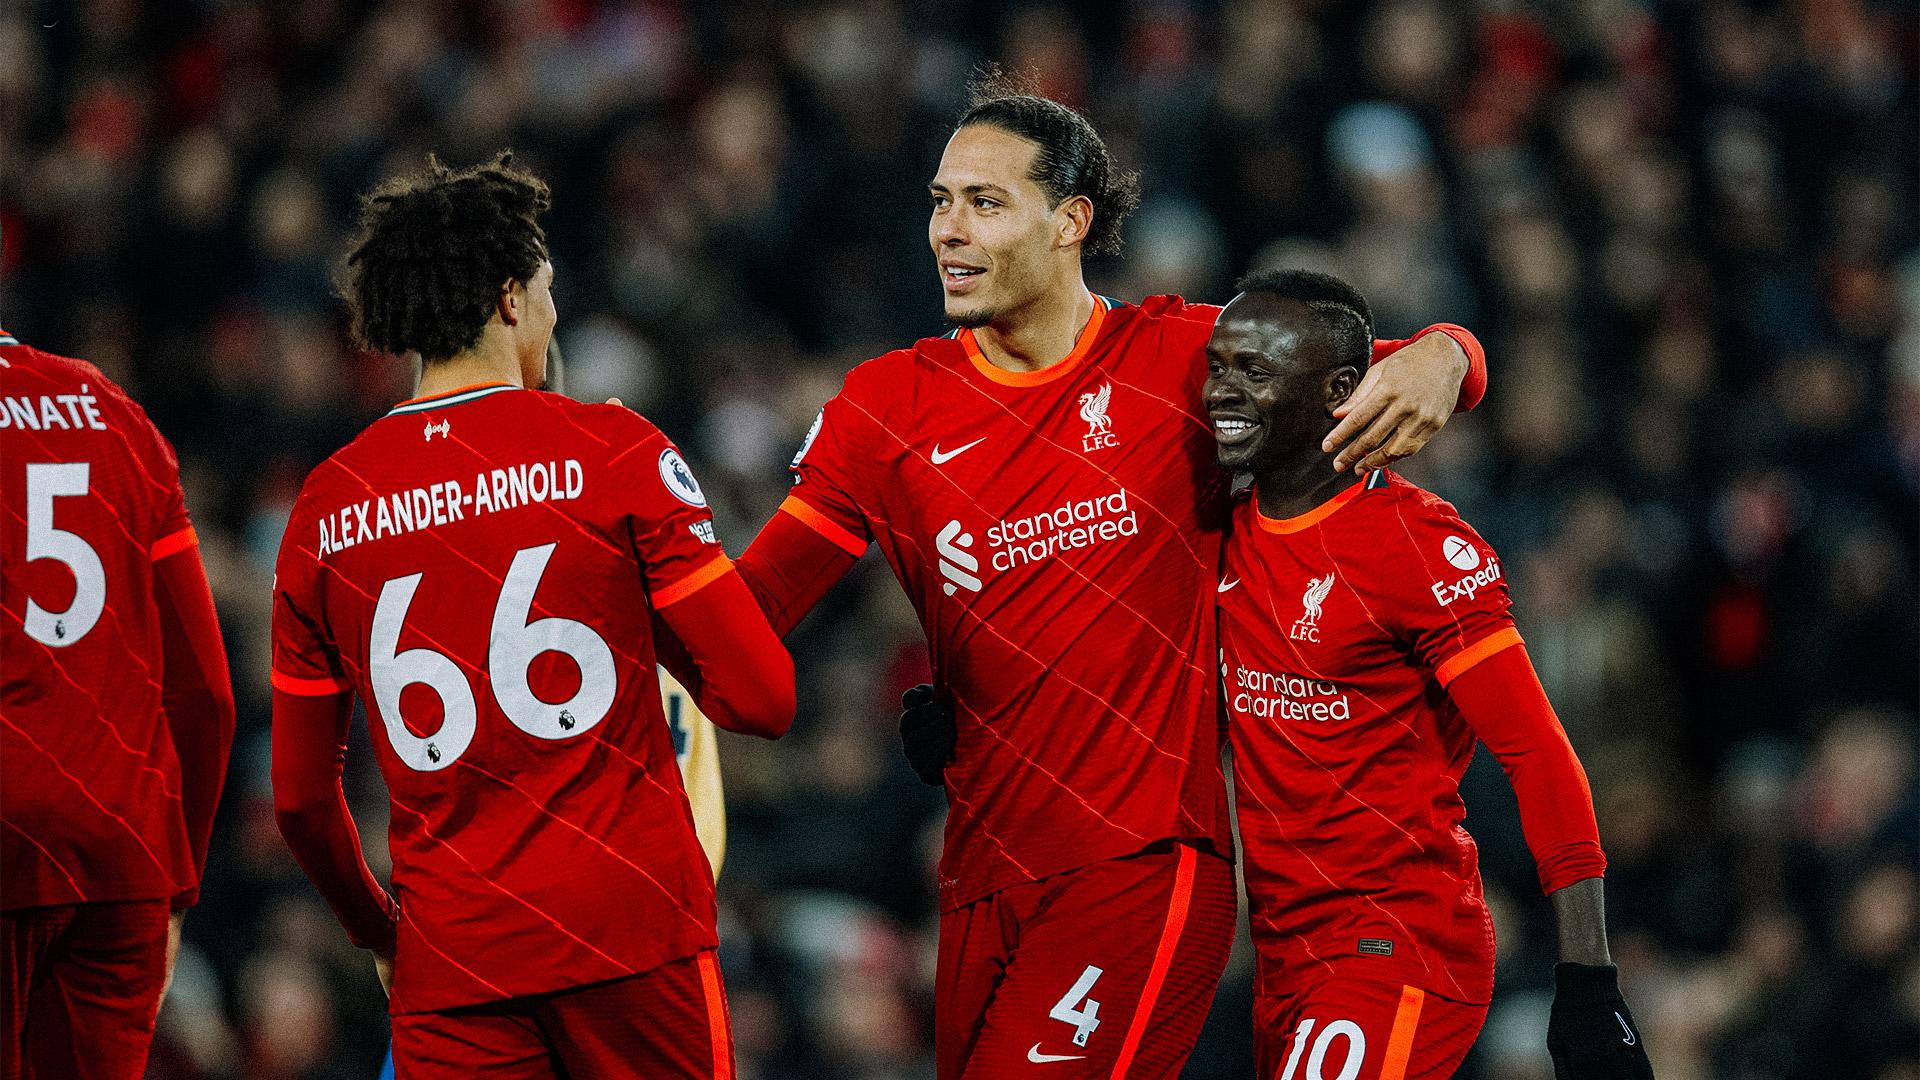 Liverpool FC - Six Reds included in PFA Premier League Team of the Year